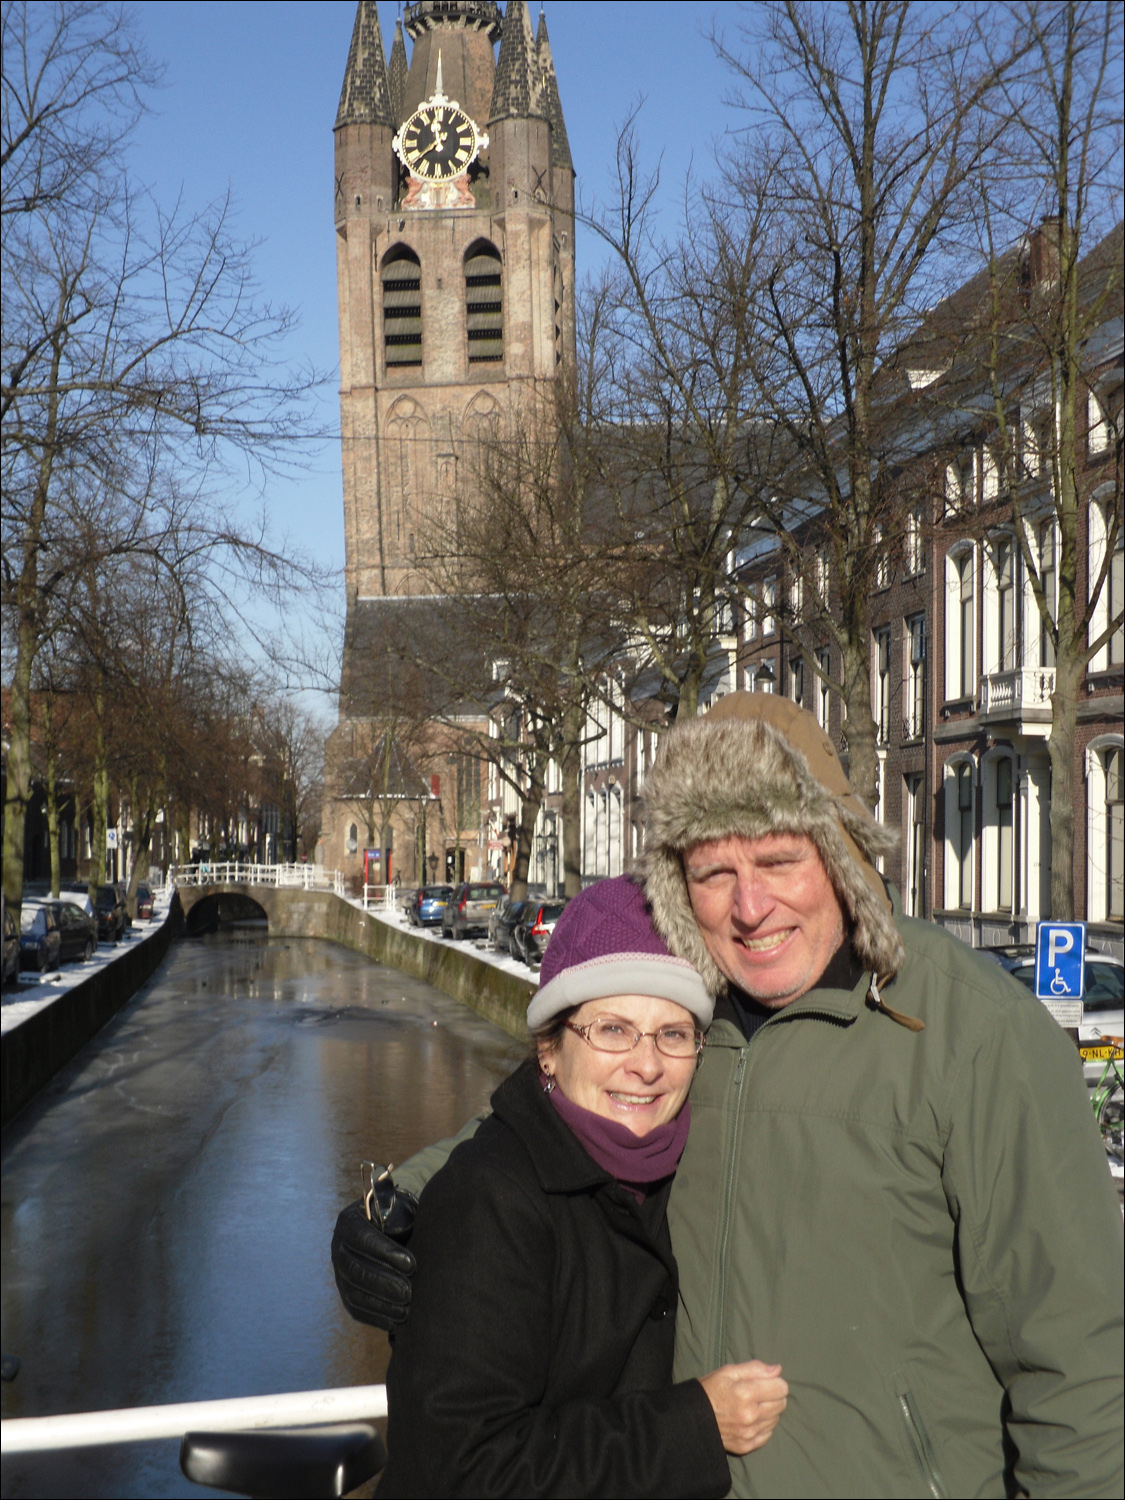 Delft-Bob & Kath in front of Oude Kerk (old church)-p.s. yes, it is leaning